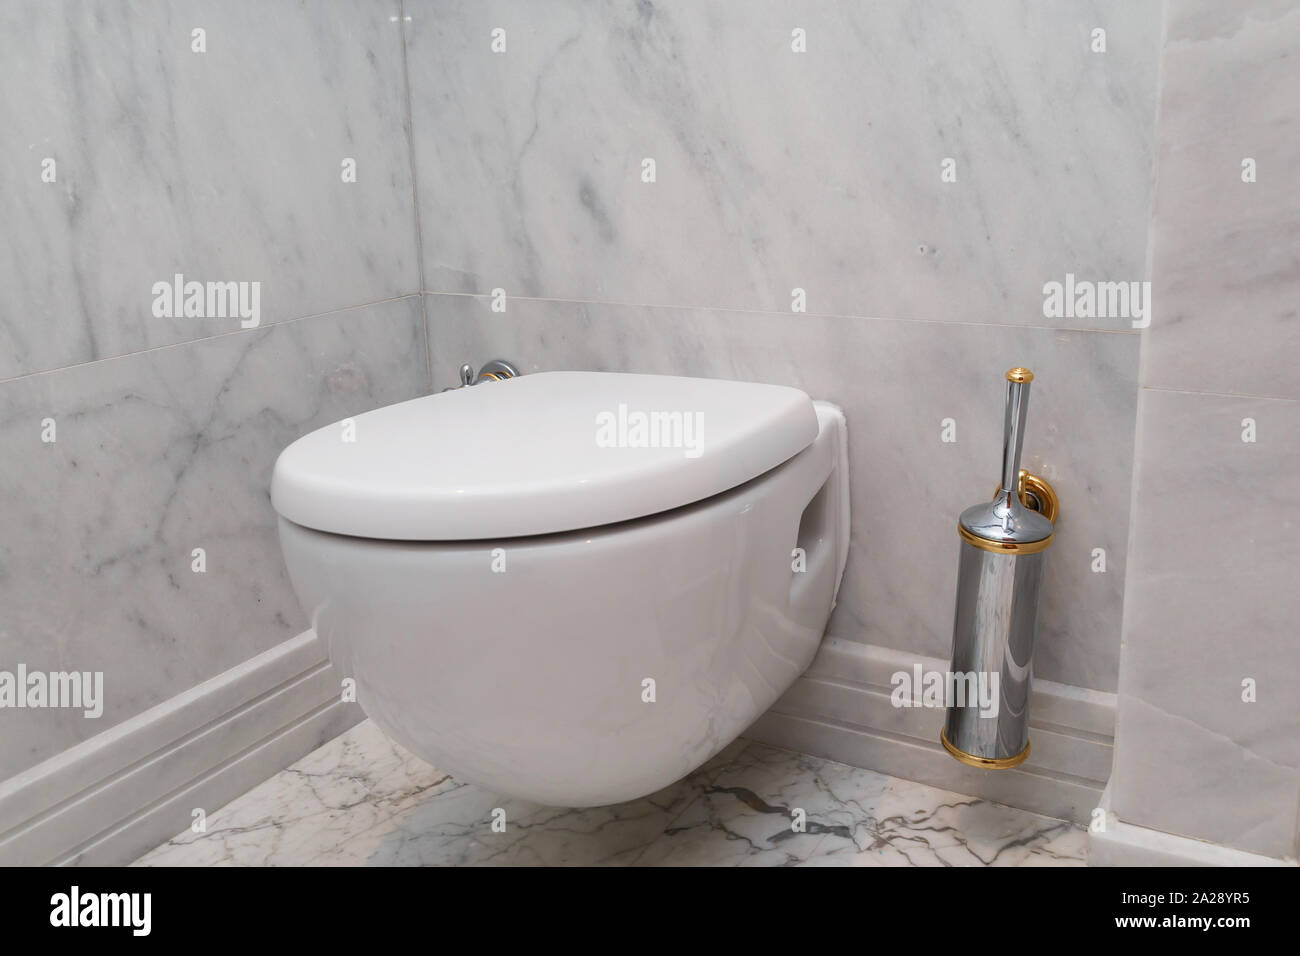 Hanging Toilet High Resolution Stock Photography and Images - Alamy